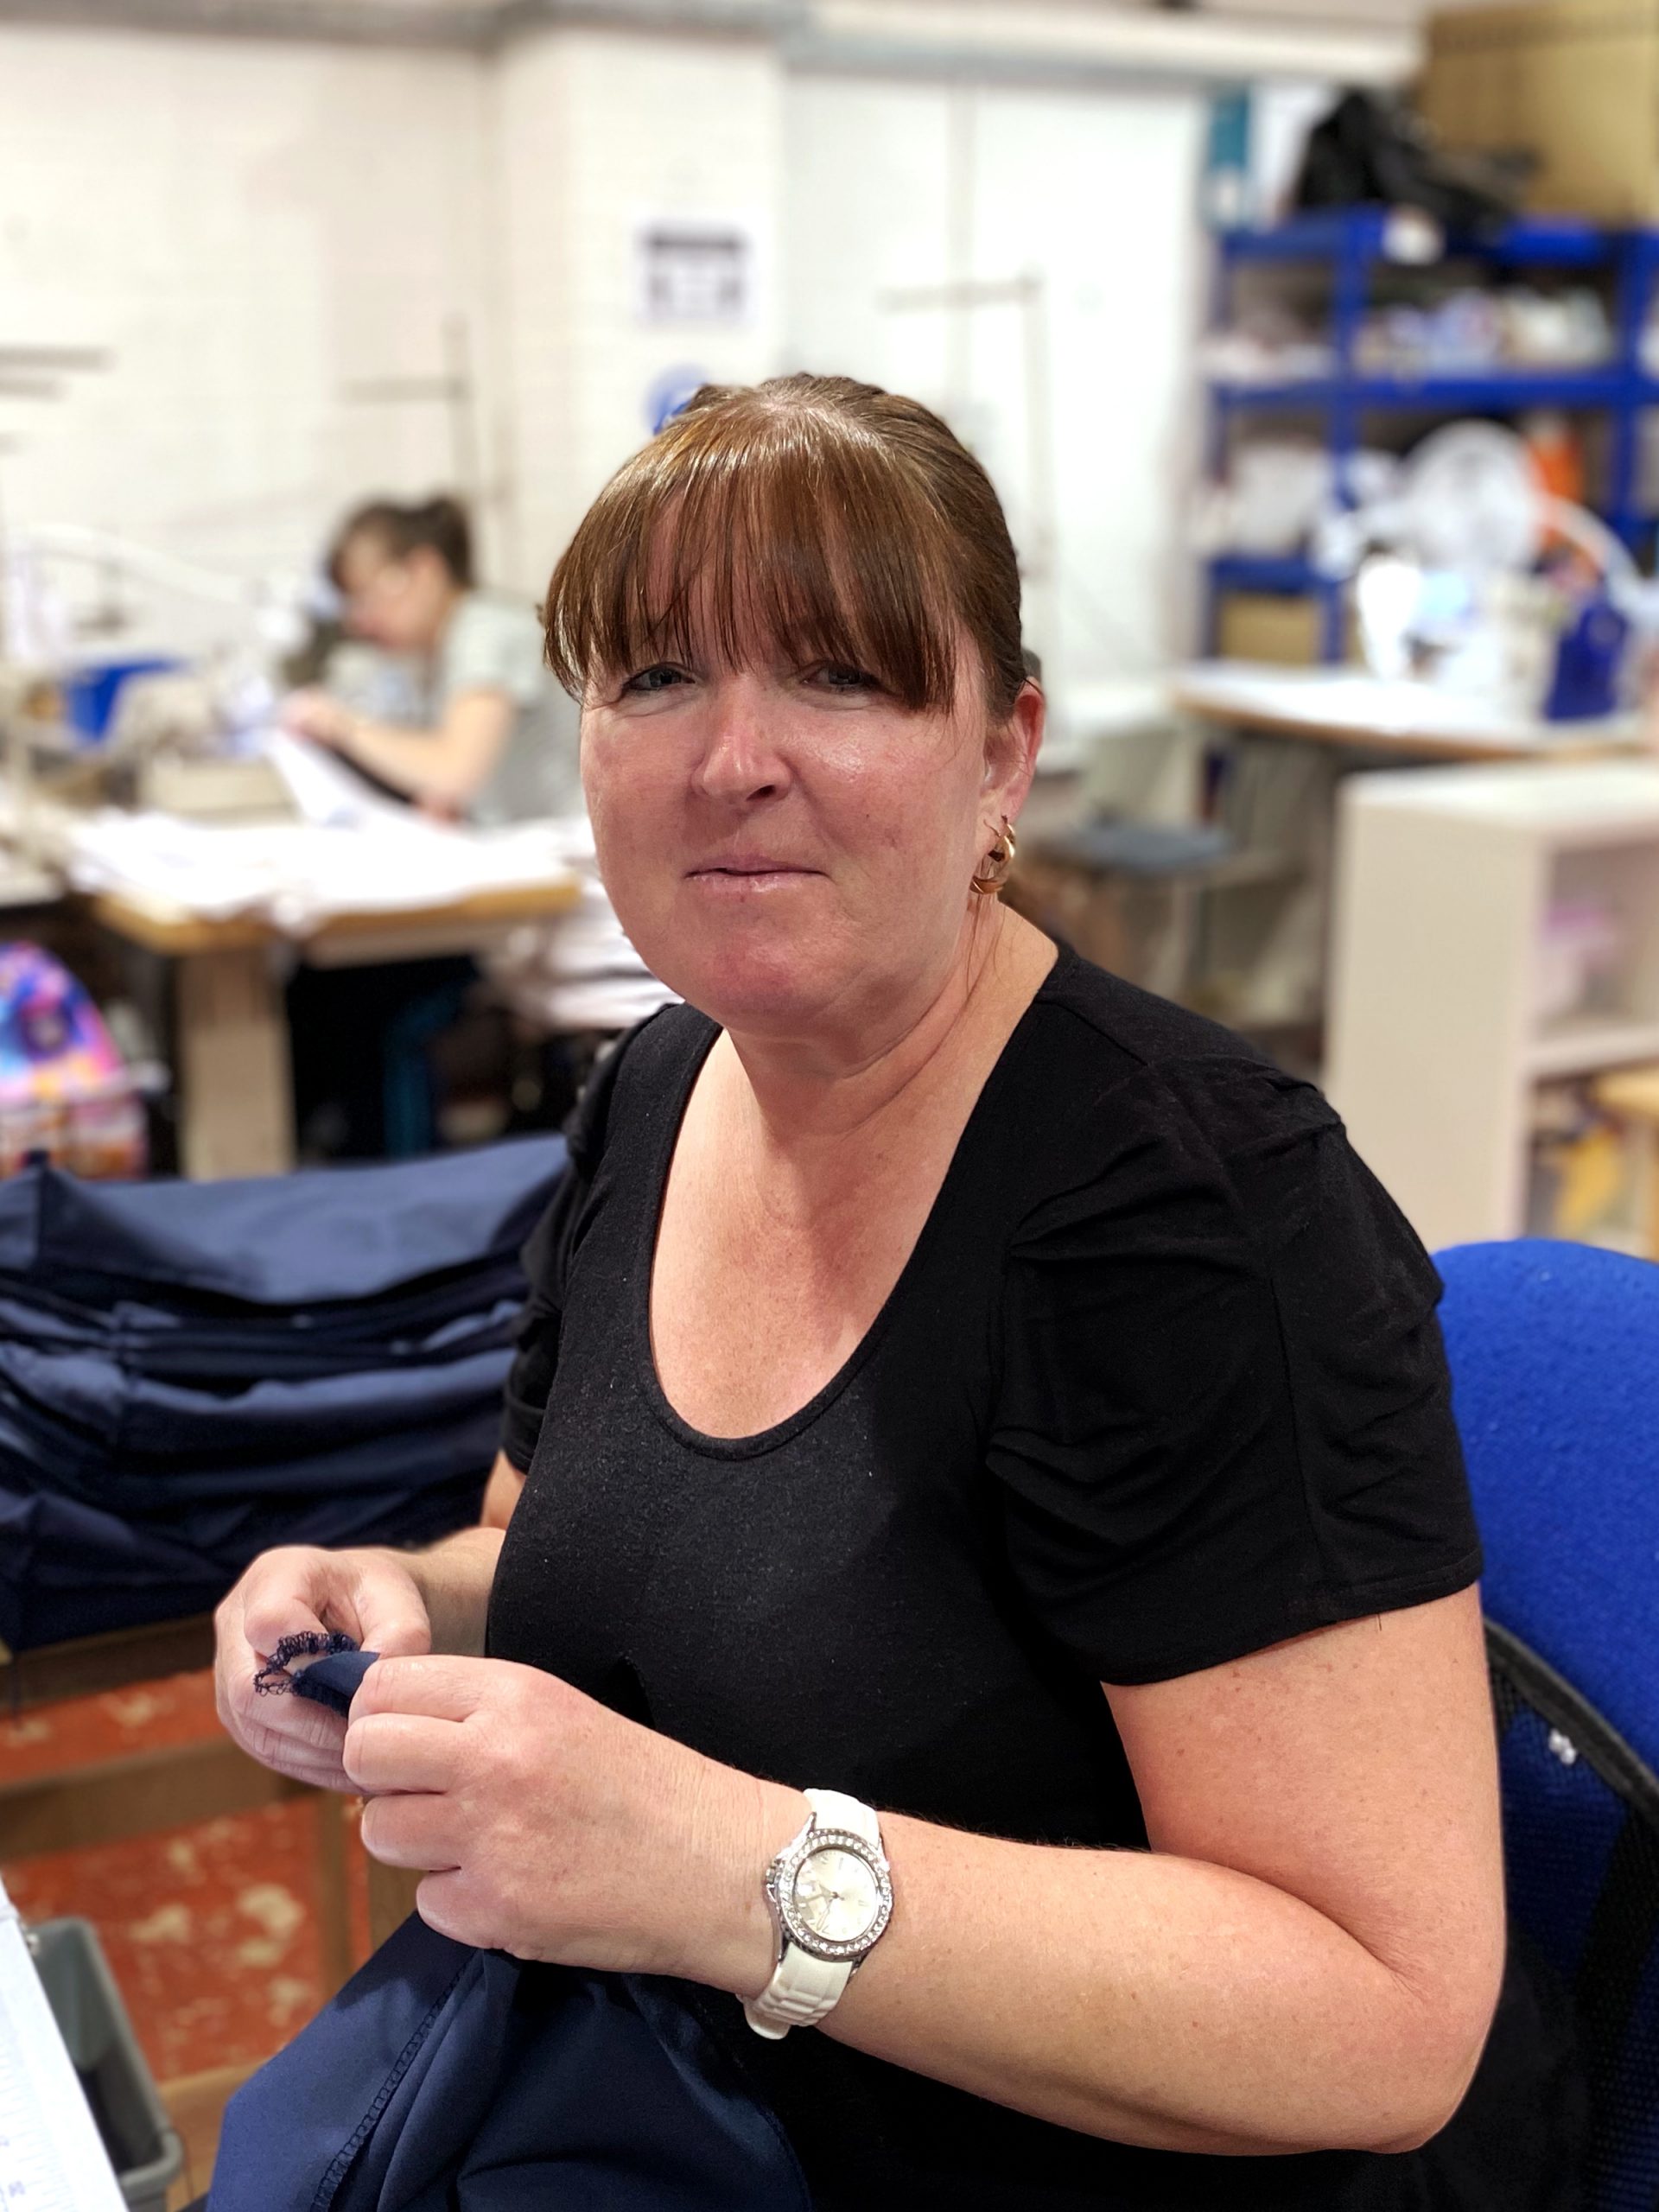 Sharon sitting in the sewing department, wrexham, UK